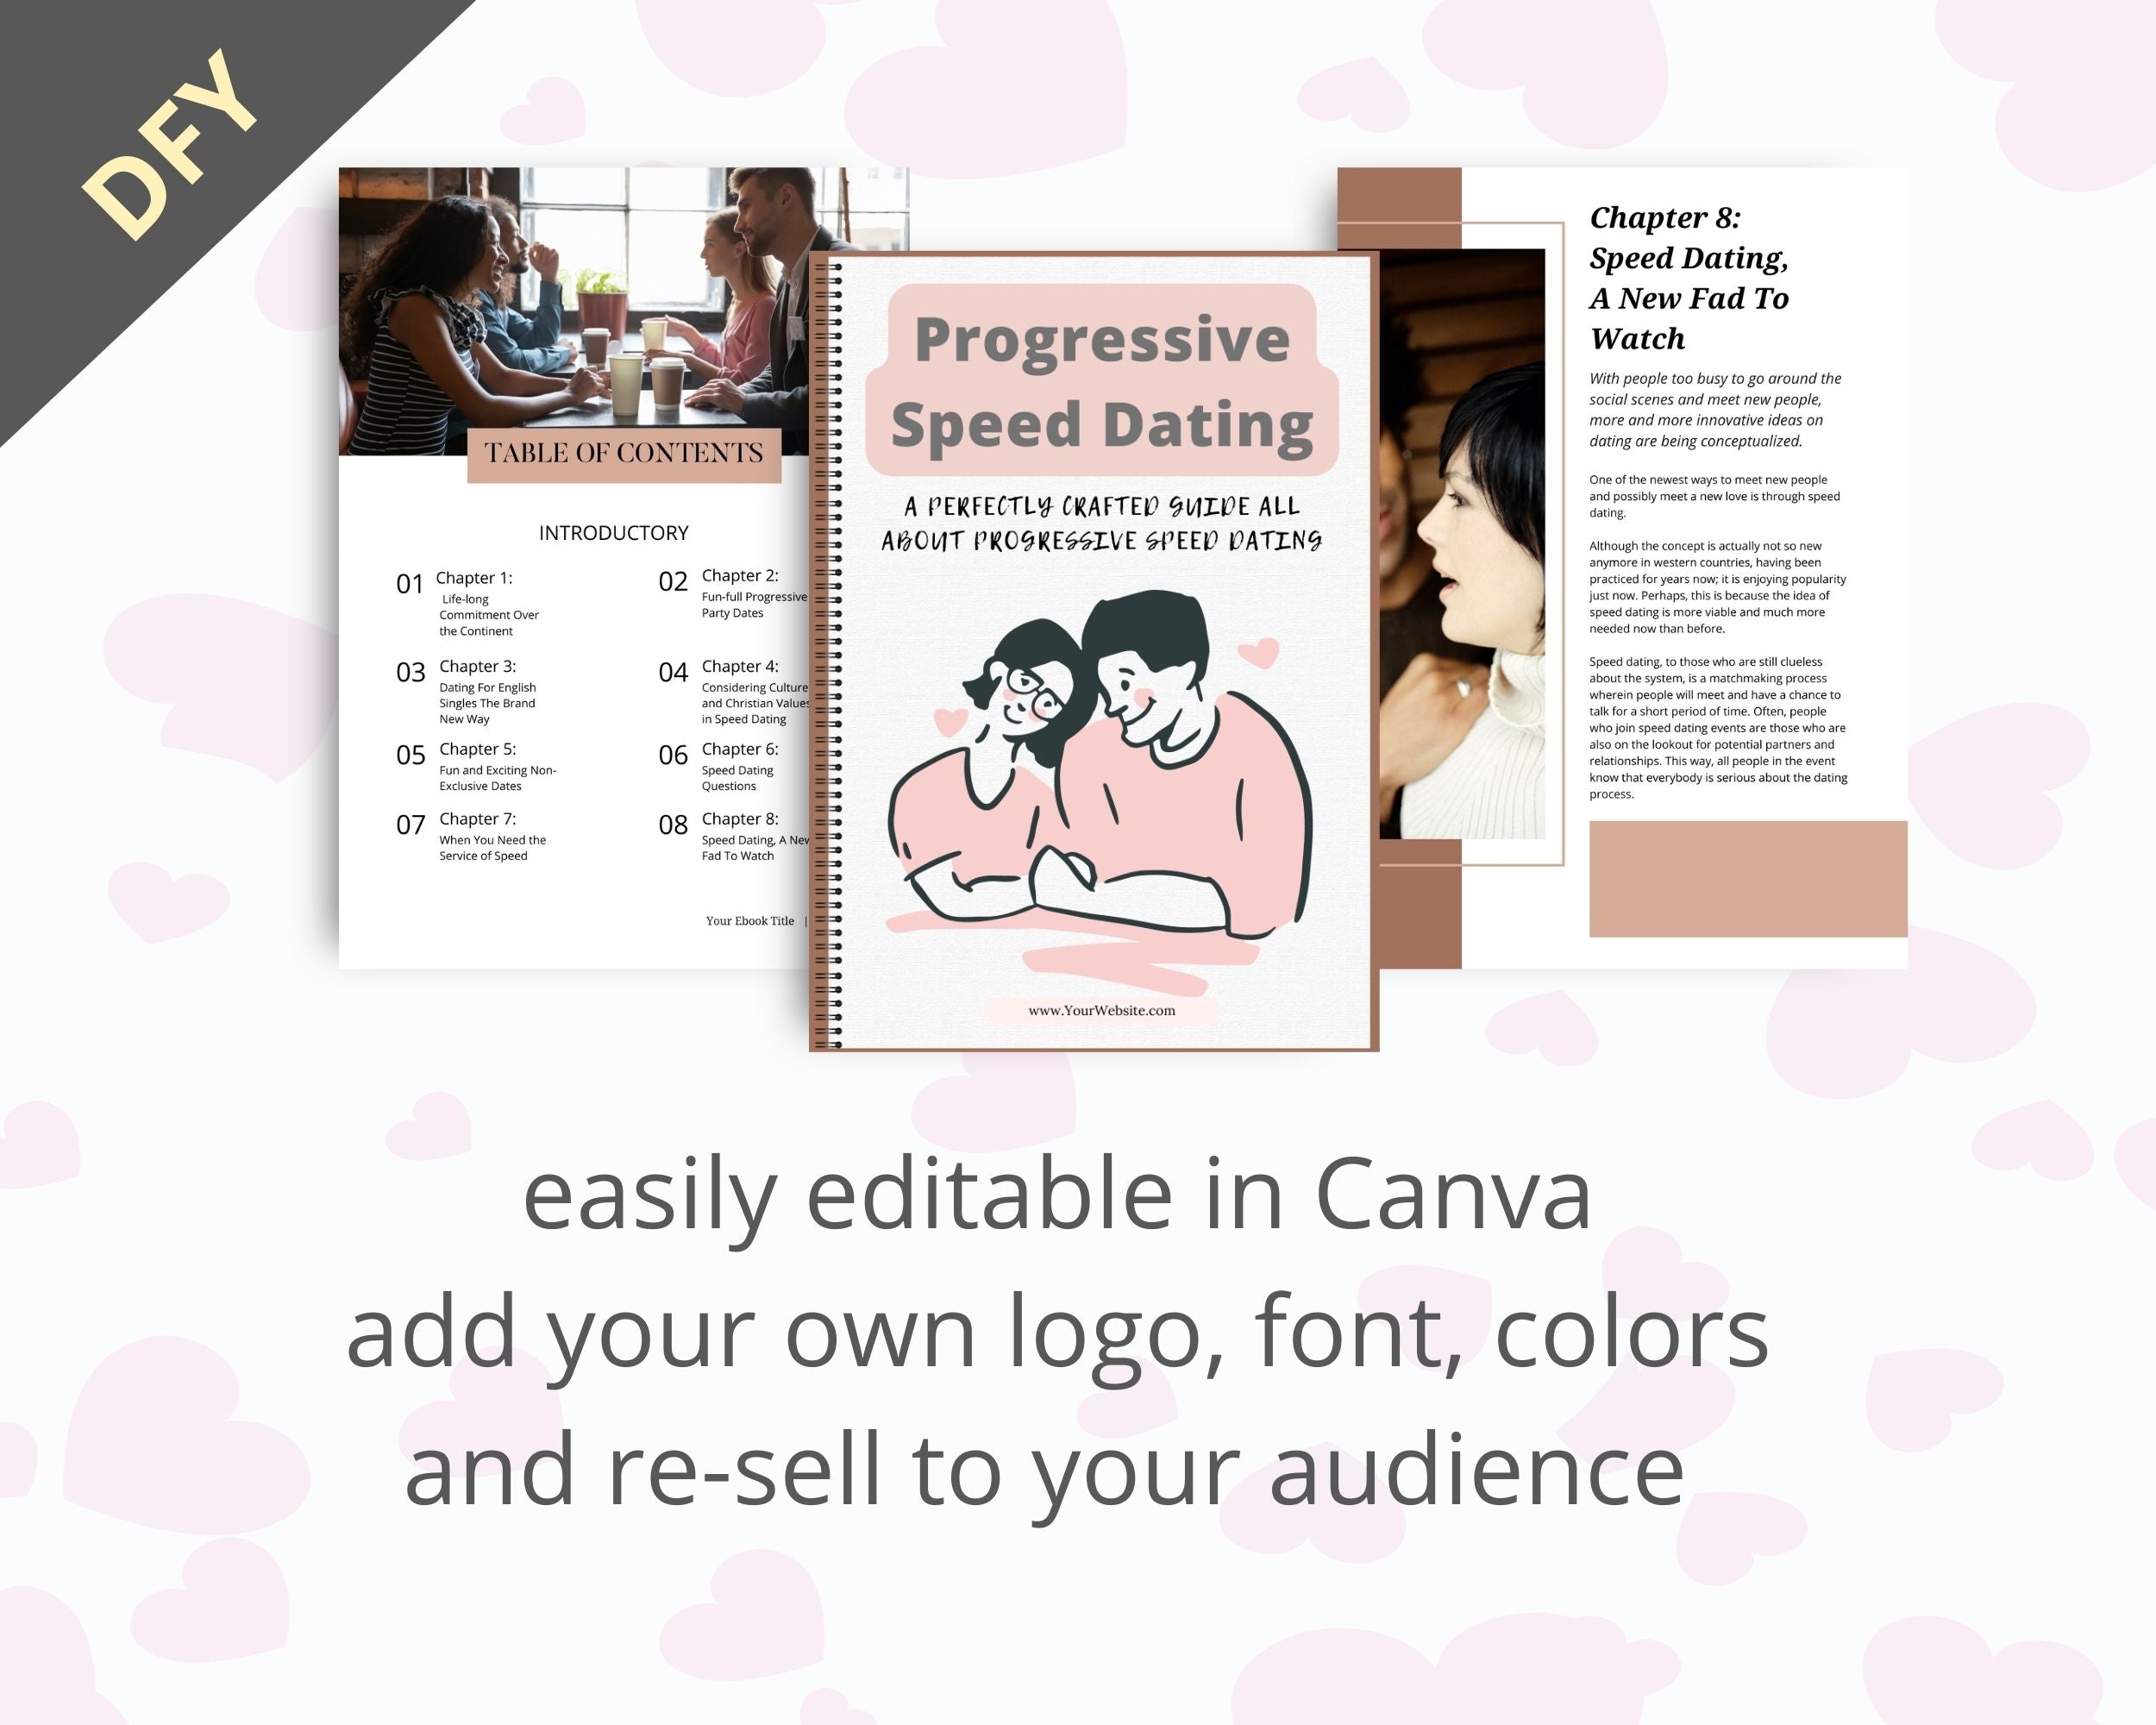 Editable Progressive Speed Dating Ebook | Done-for-You Ebook in Canva | Rebrandable and Resizable Canva Template